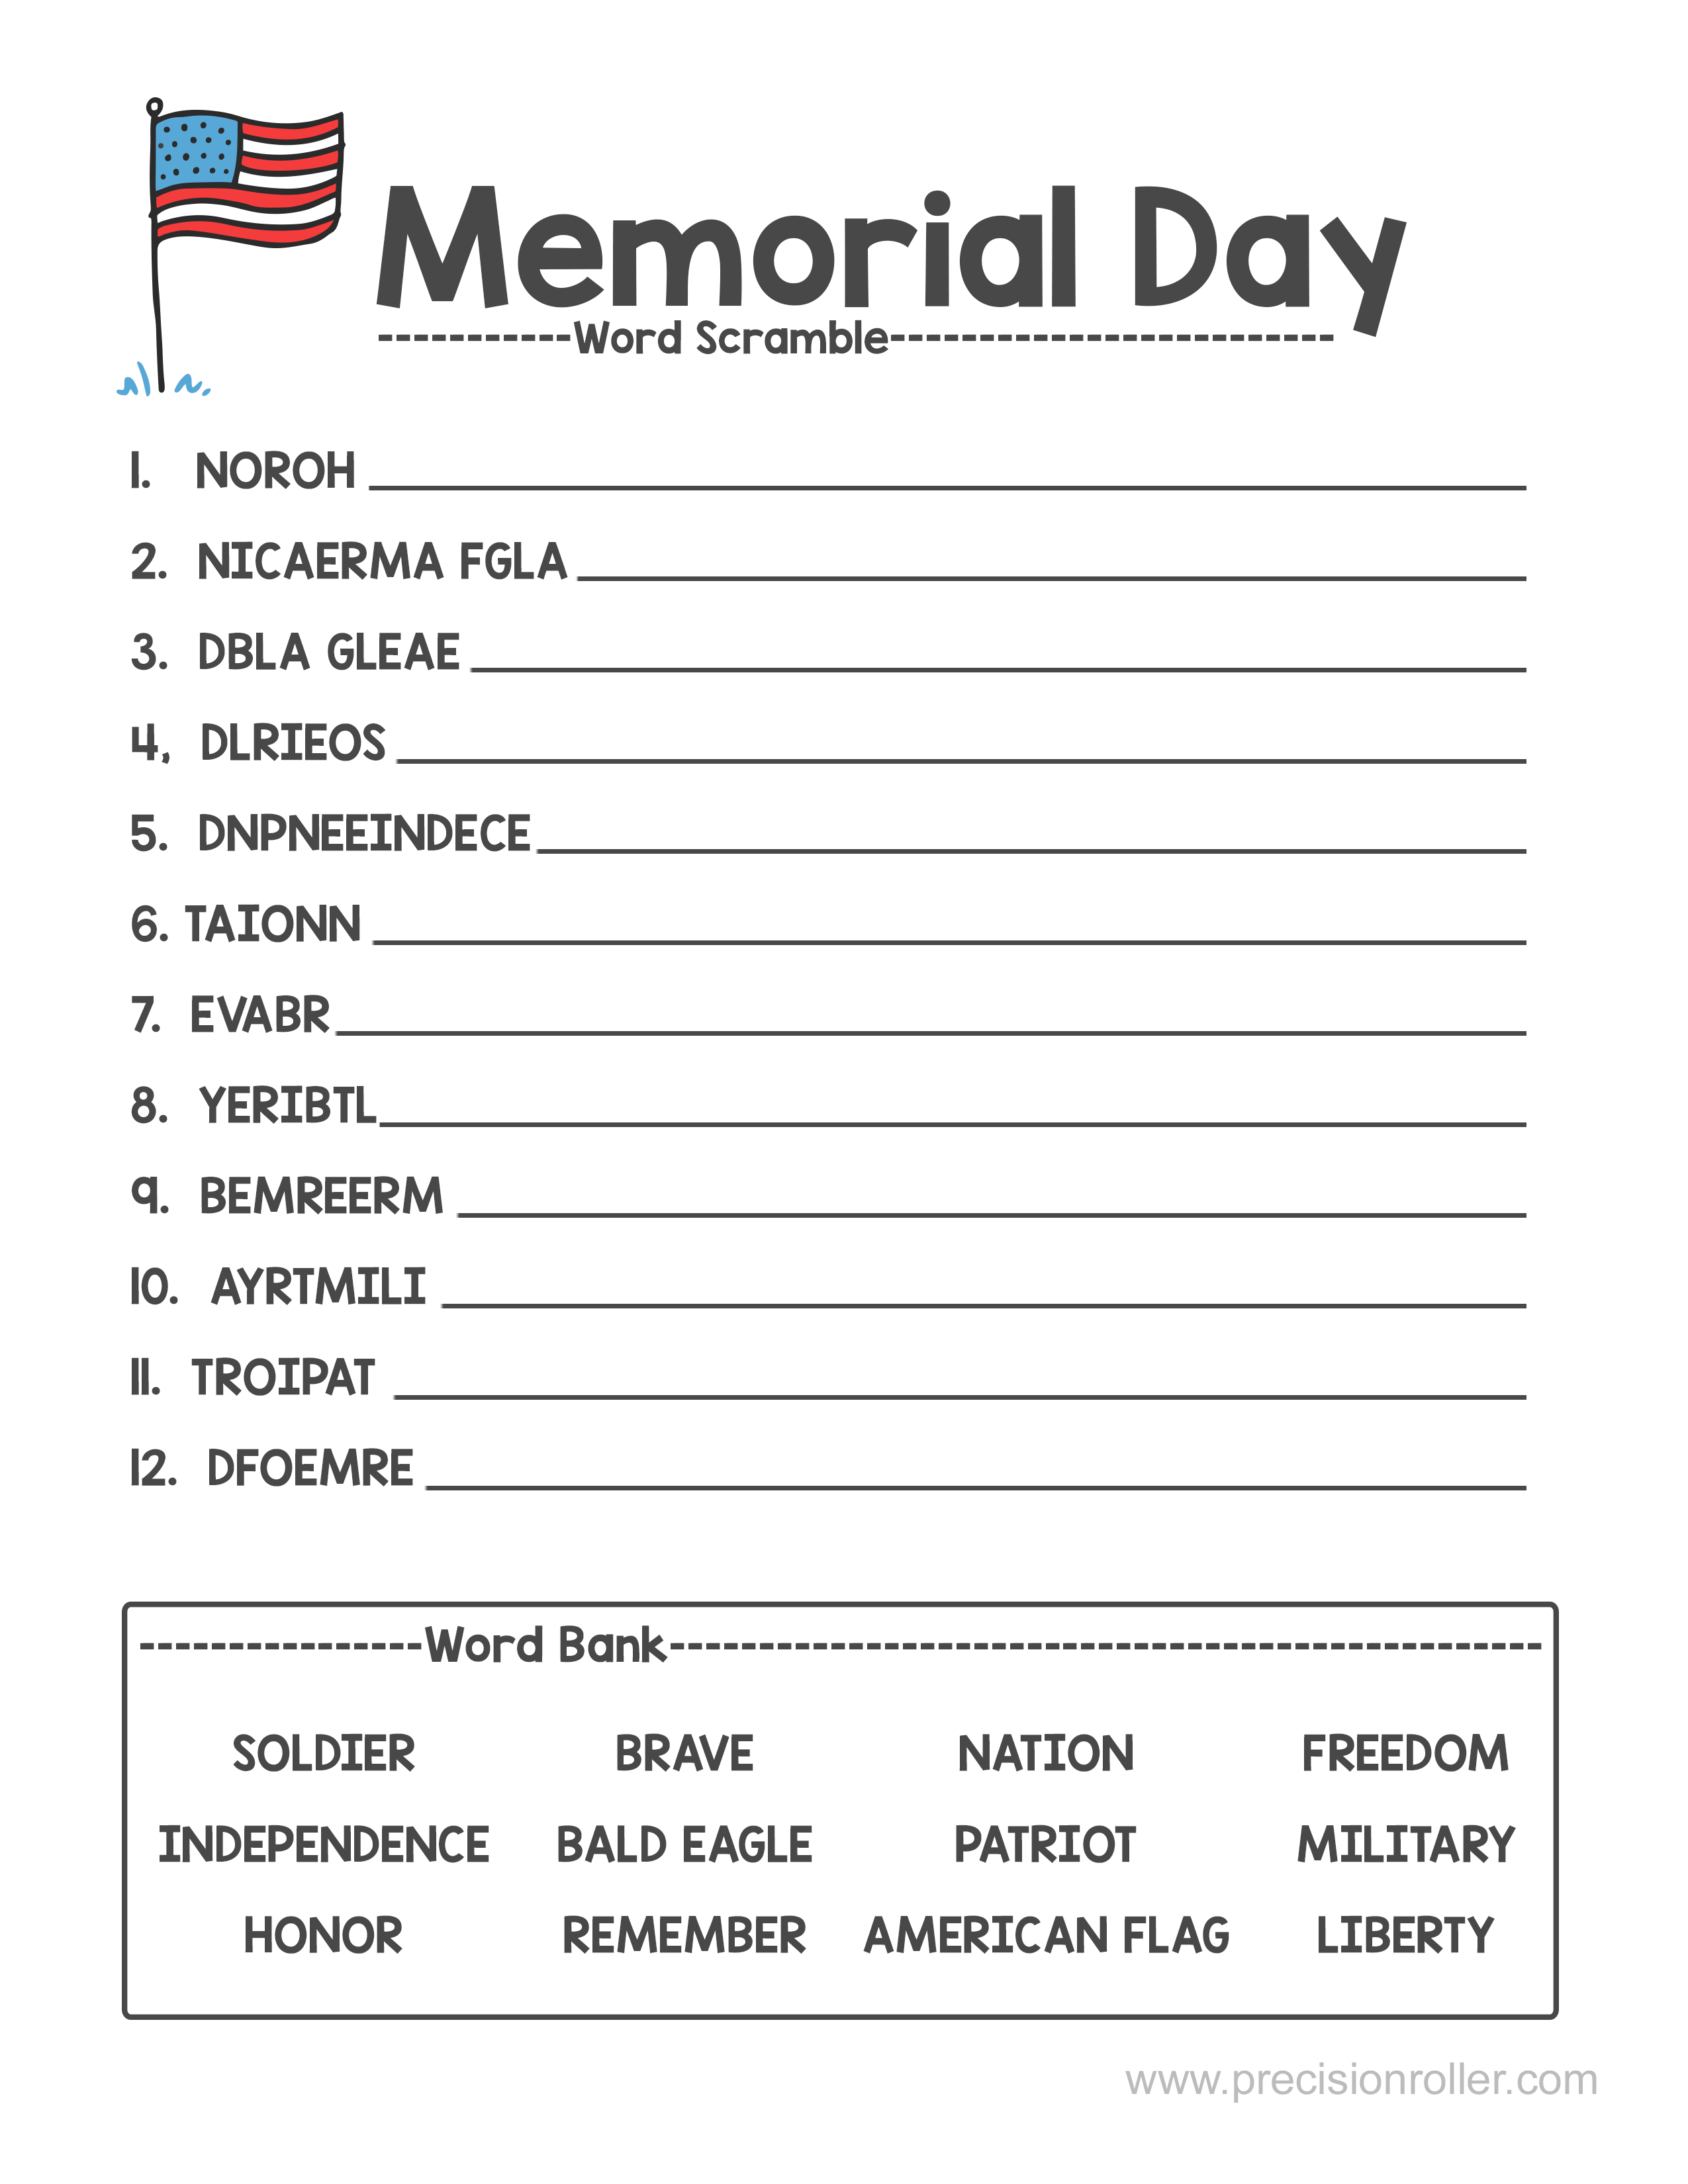 memorial-day-worksheets-memorial-day-story-reading-comprehension